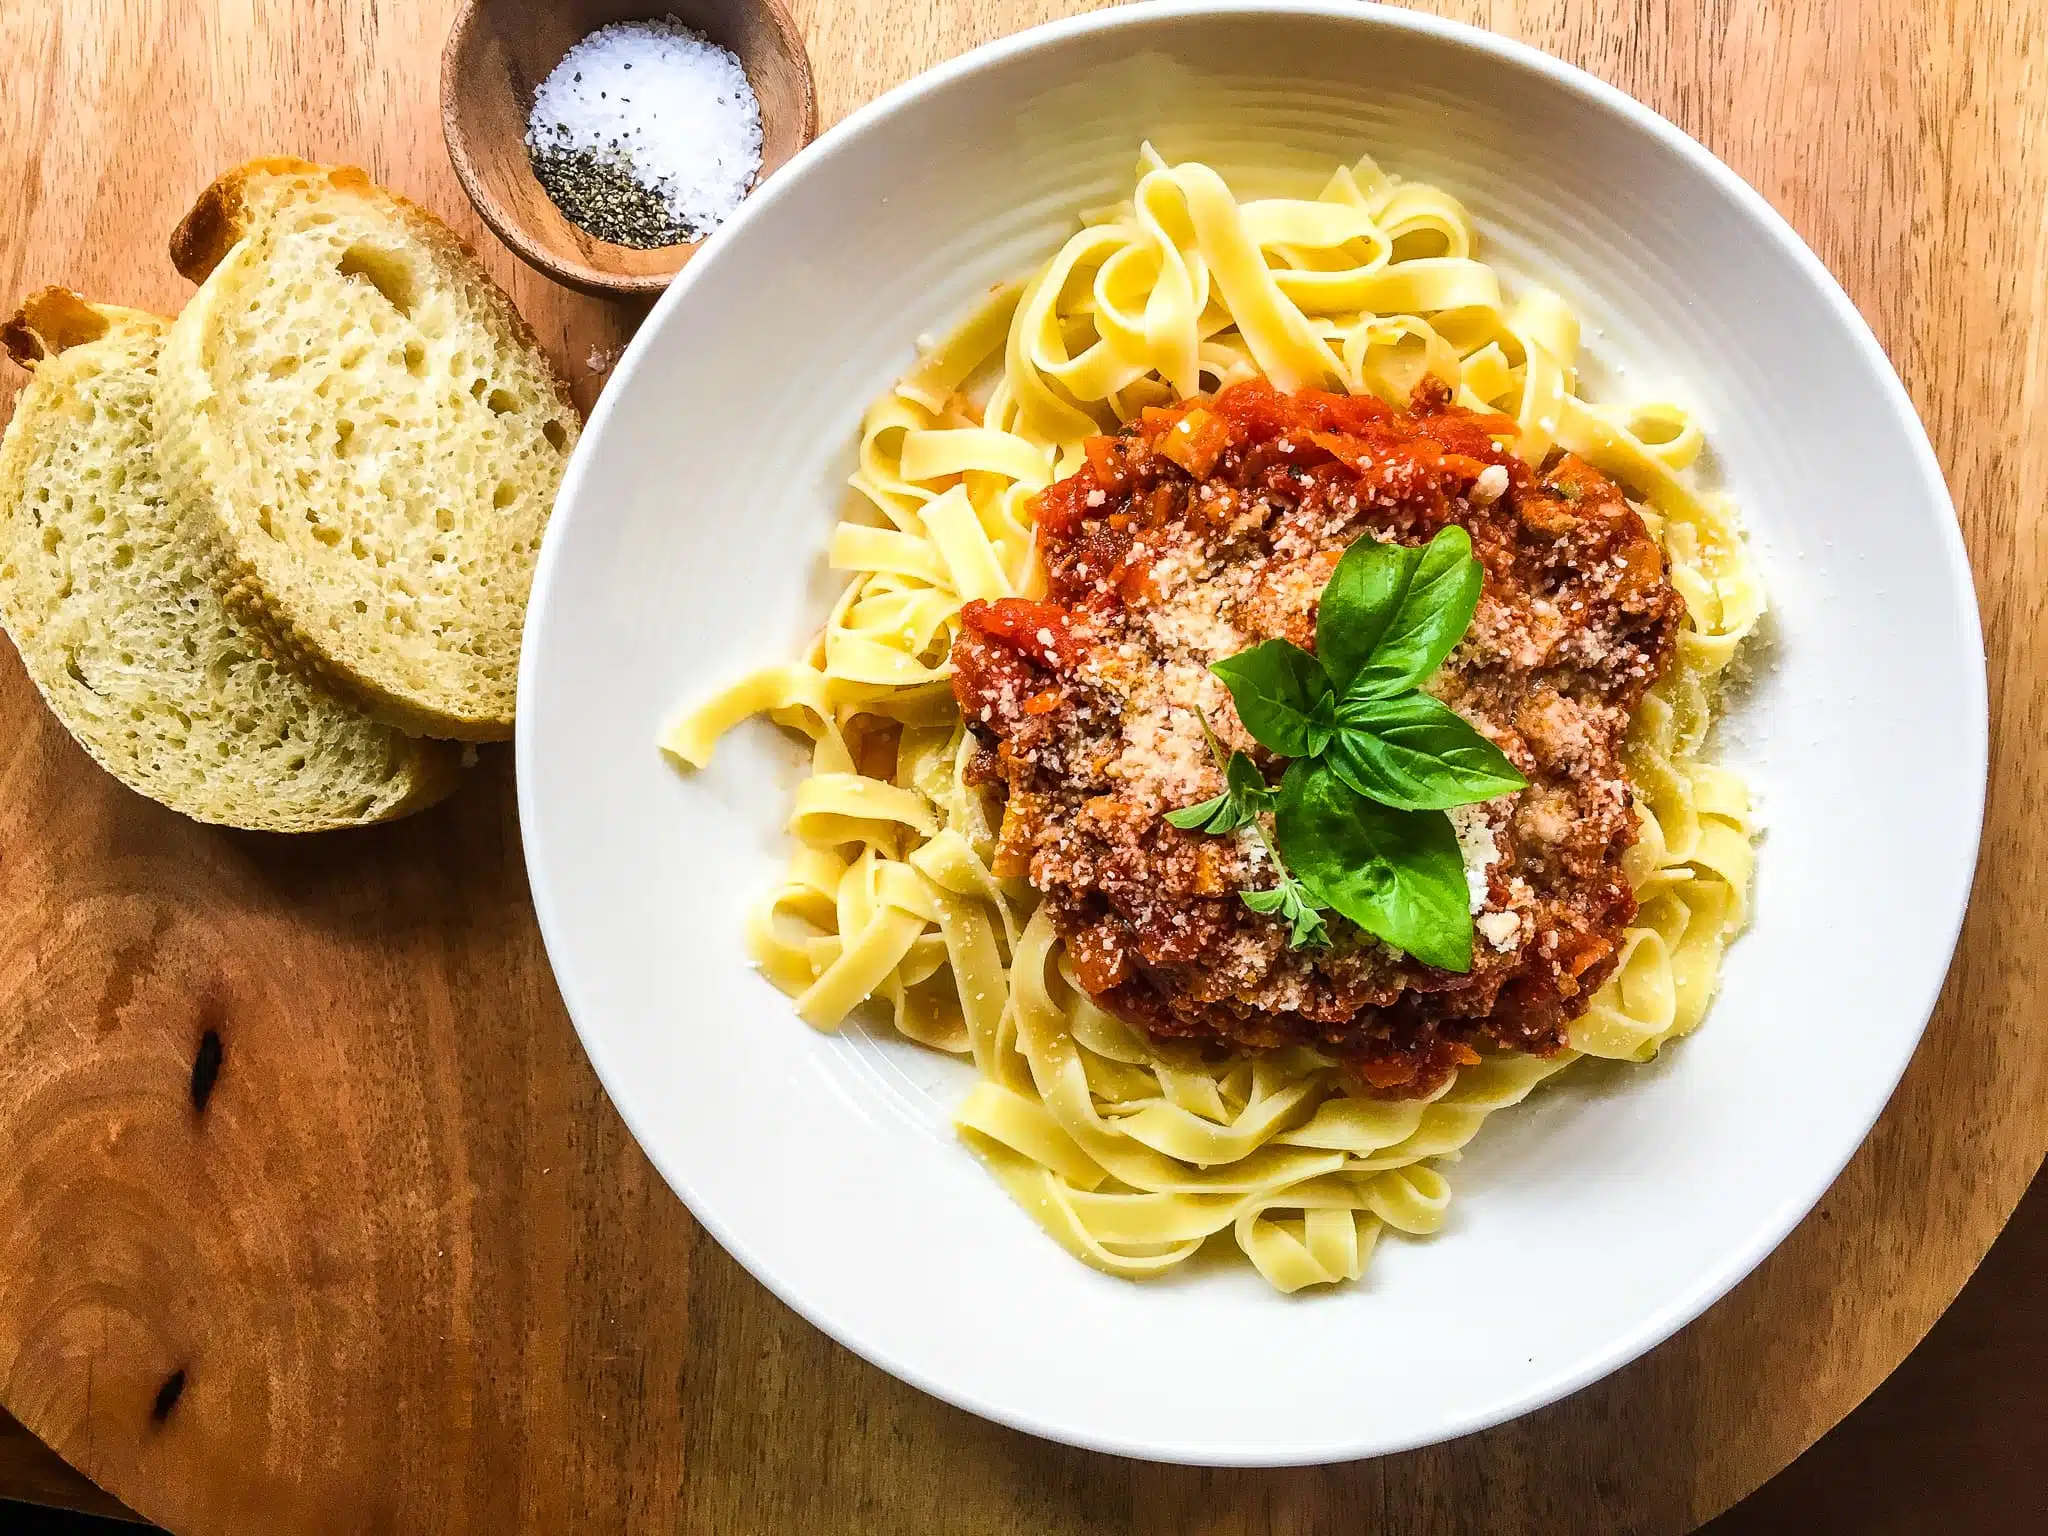 a plate of pasta with meat sauce